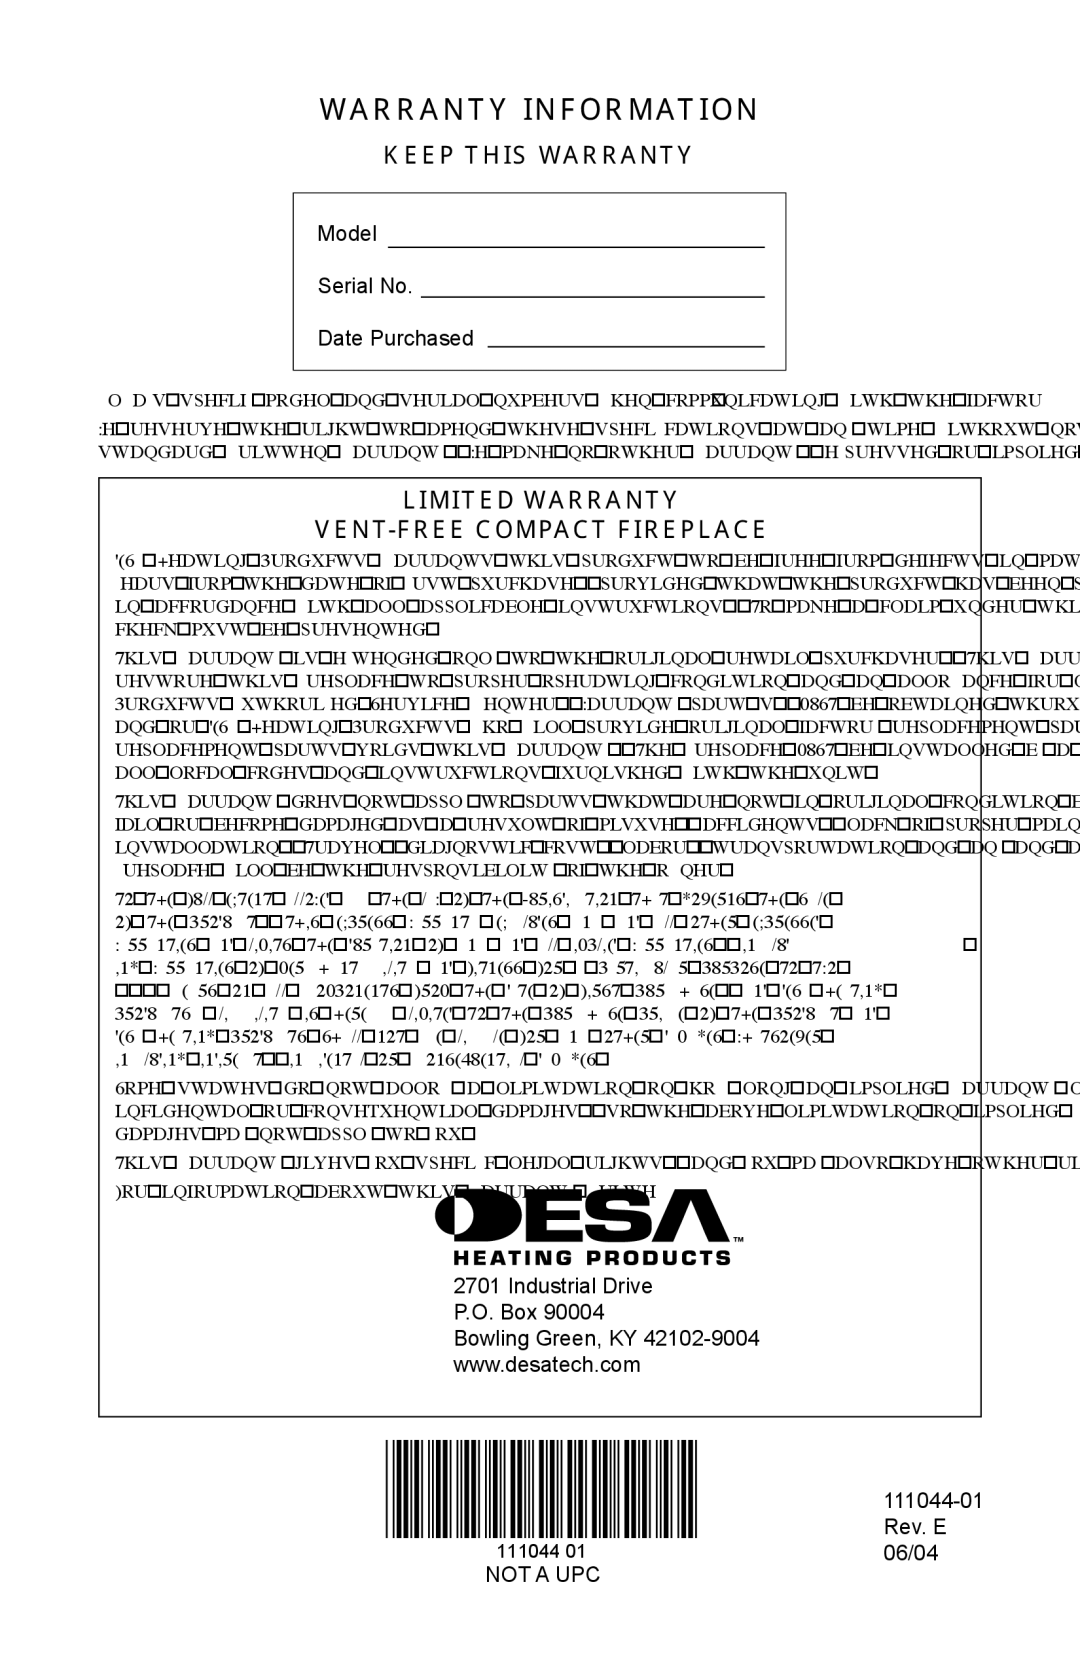 Desa HDCFTP installation manual Warranty Information, Keep this Warranty, Limited Warranty VENT-FREE Compact Fireplace 